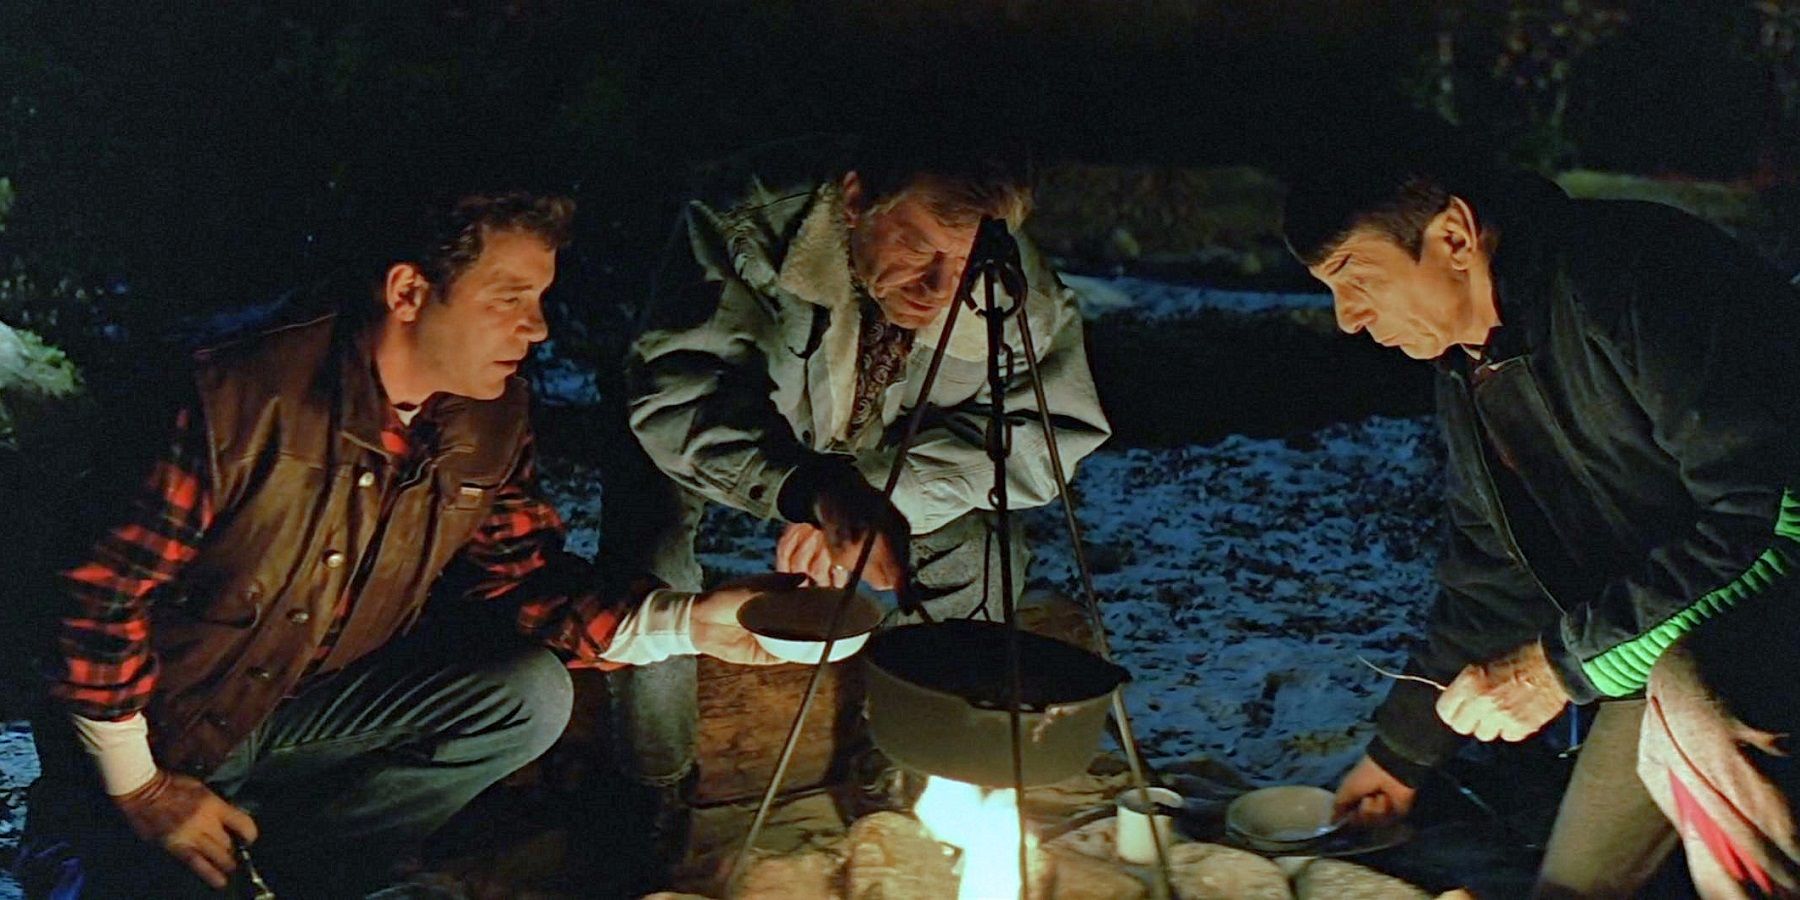 Kirk, Spock and McCoy around a campfire in Star Trek V: The Final Frontier.